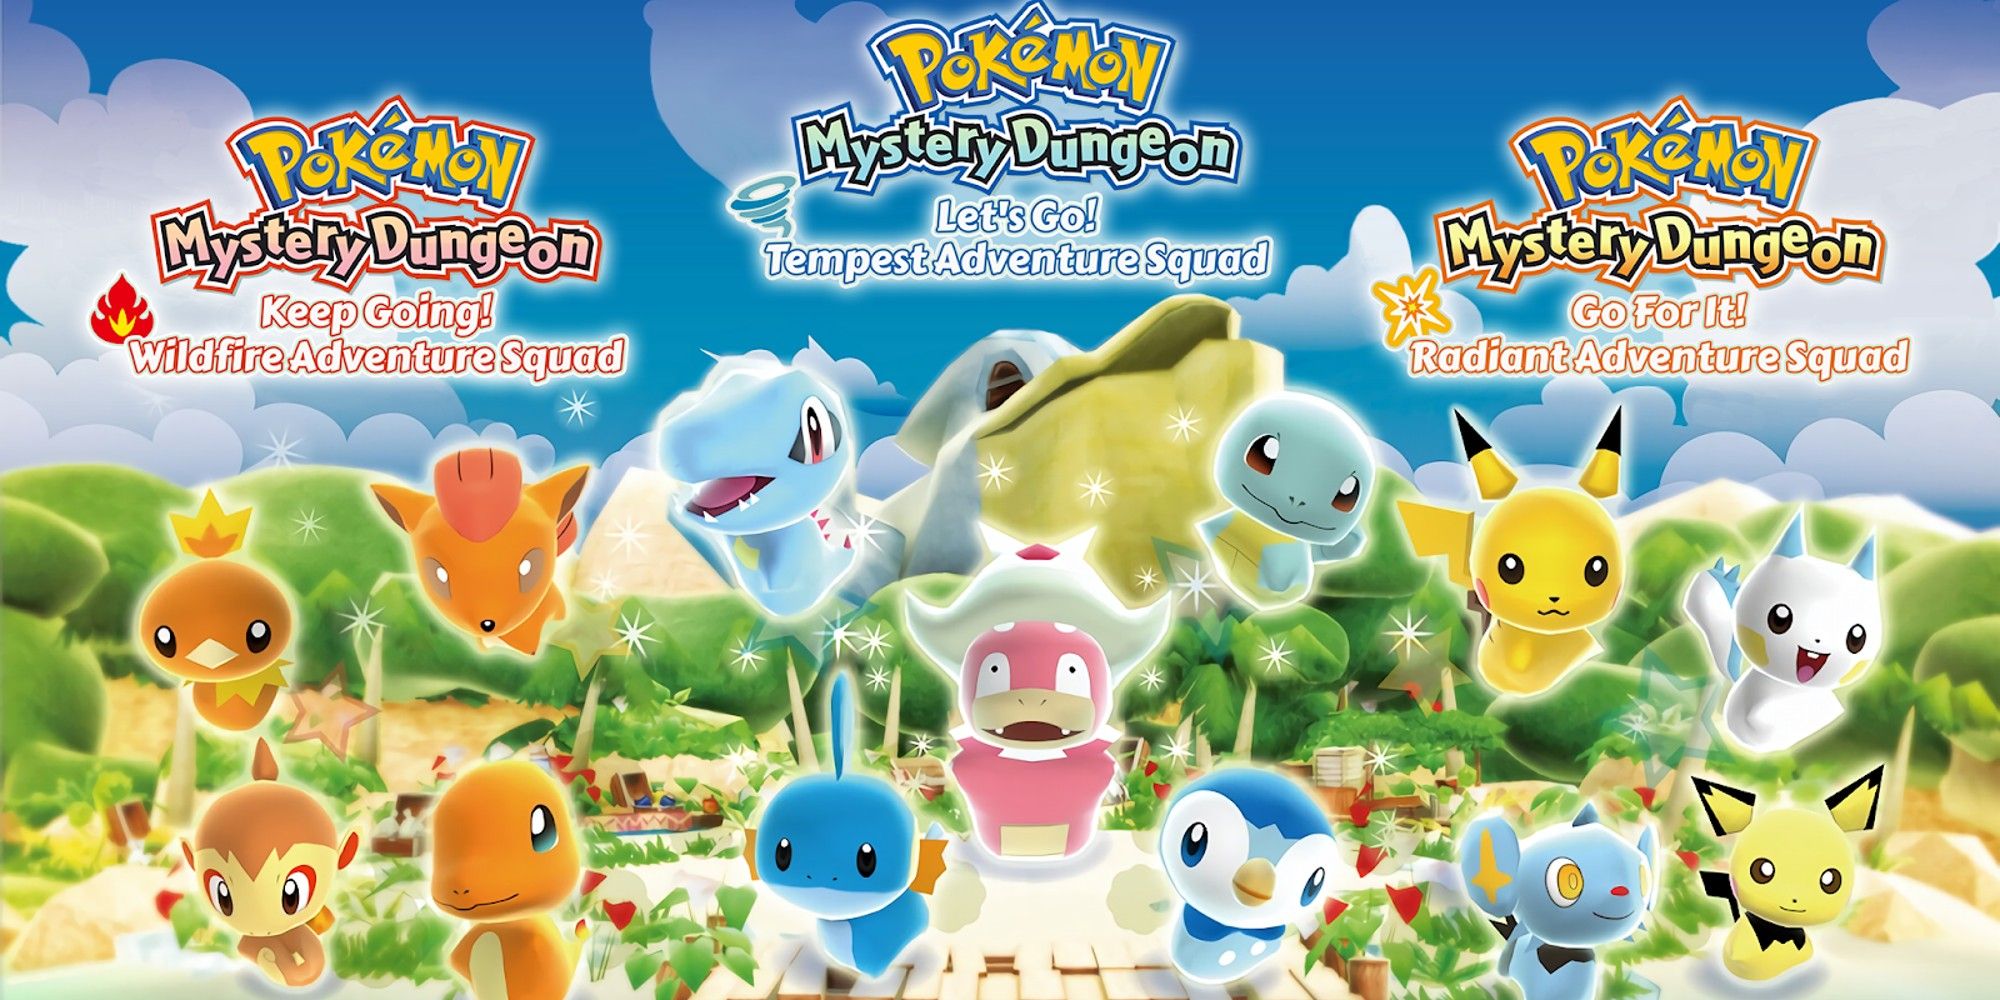 Pokemon Mystery Dungeon Adventure Squad cover art featuring several playable Pokemon models and the game logo